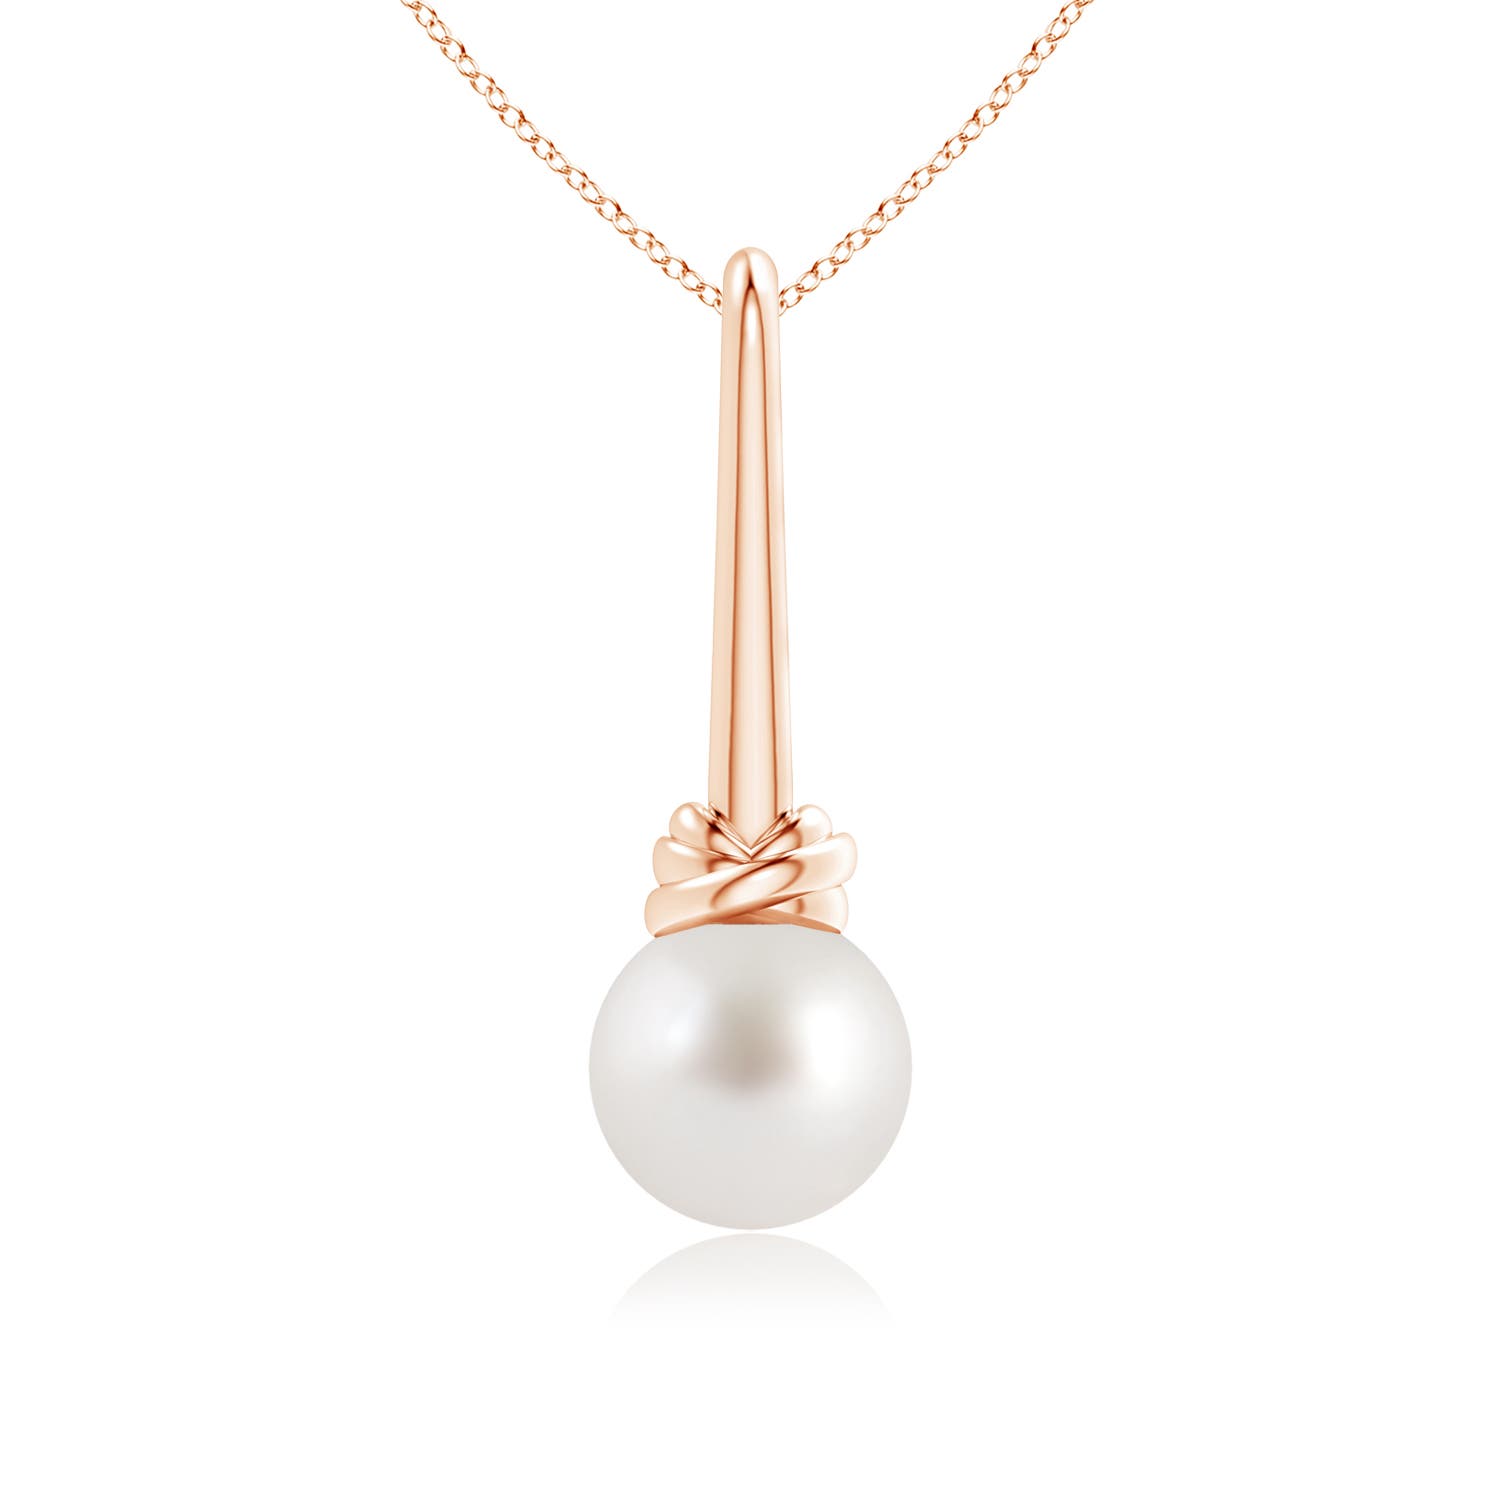 AAA - South Sea Cultured Pearl / 5.25 CT / 14 KT Rose Gold